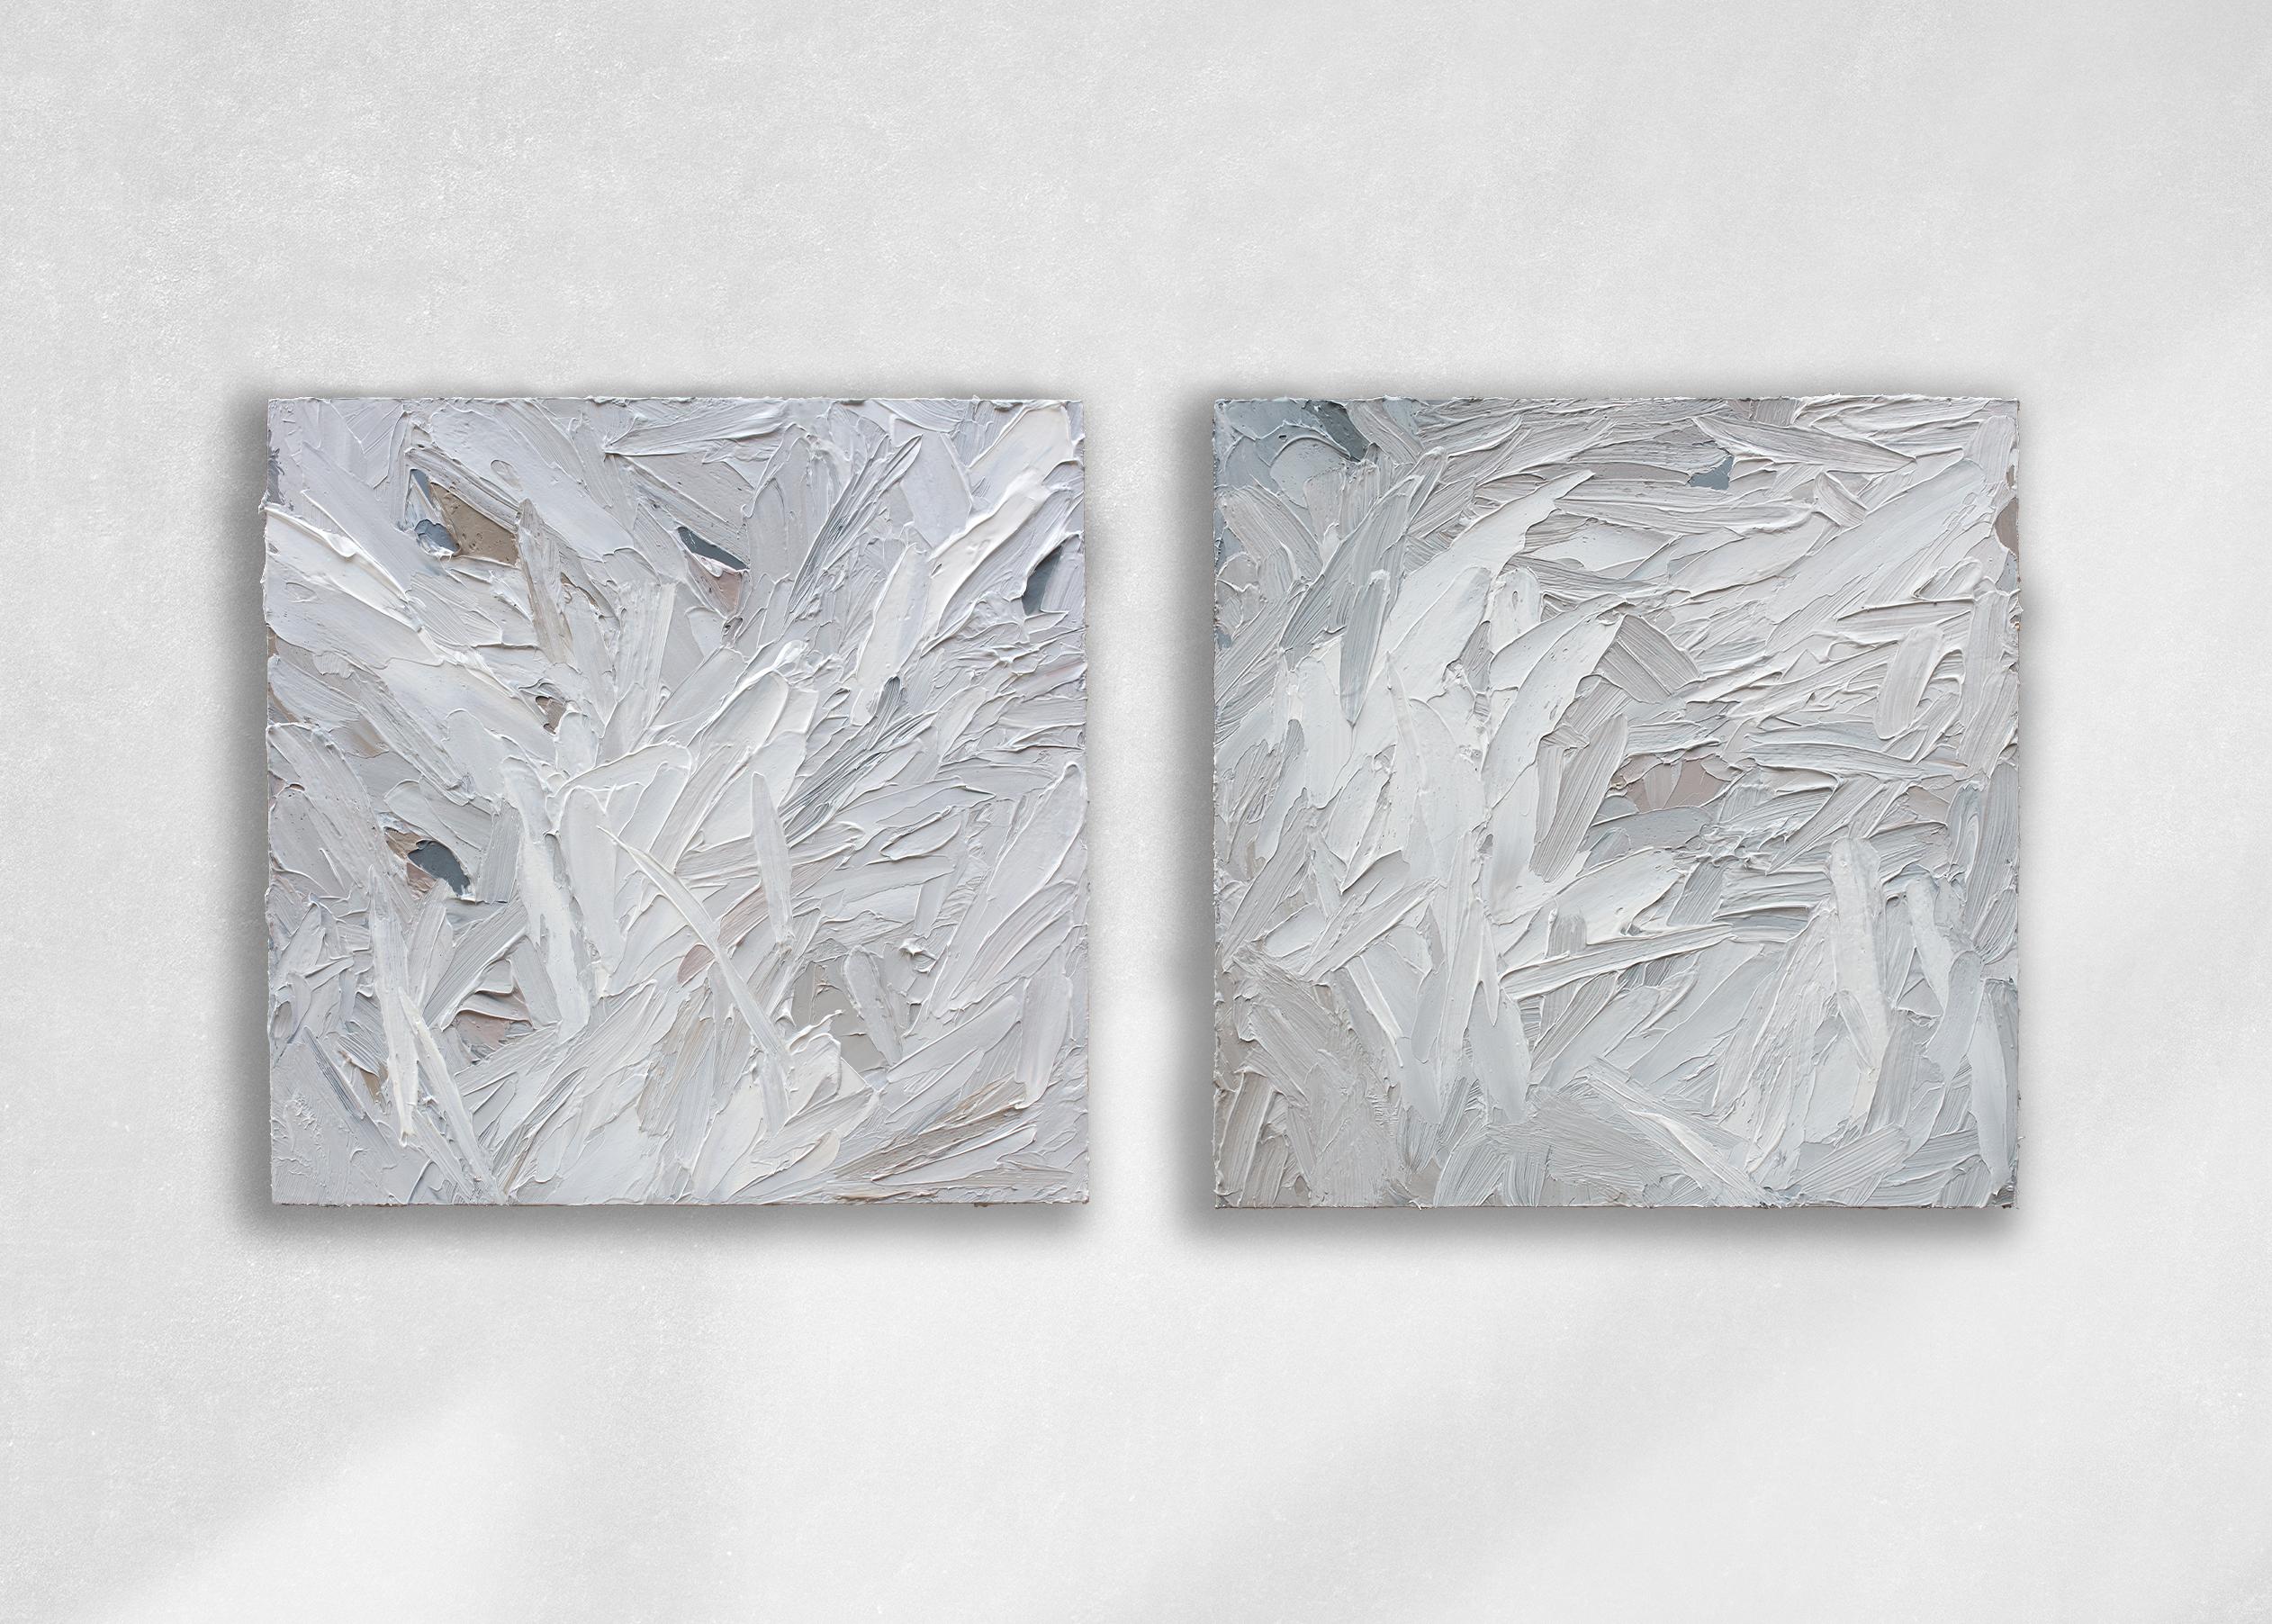 This pair of textured abstract paintings by Teodora Guererra features a light, greyscale palette with subtle warm accents throughout the composition. The artist layers thick strokes of paint using a palette knife over board, creating an abstract